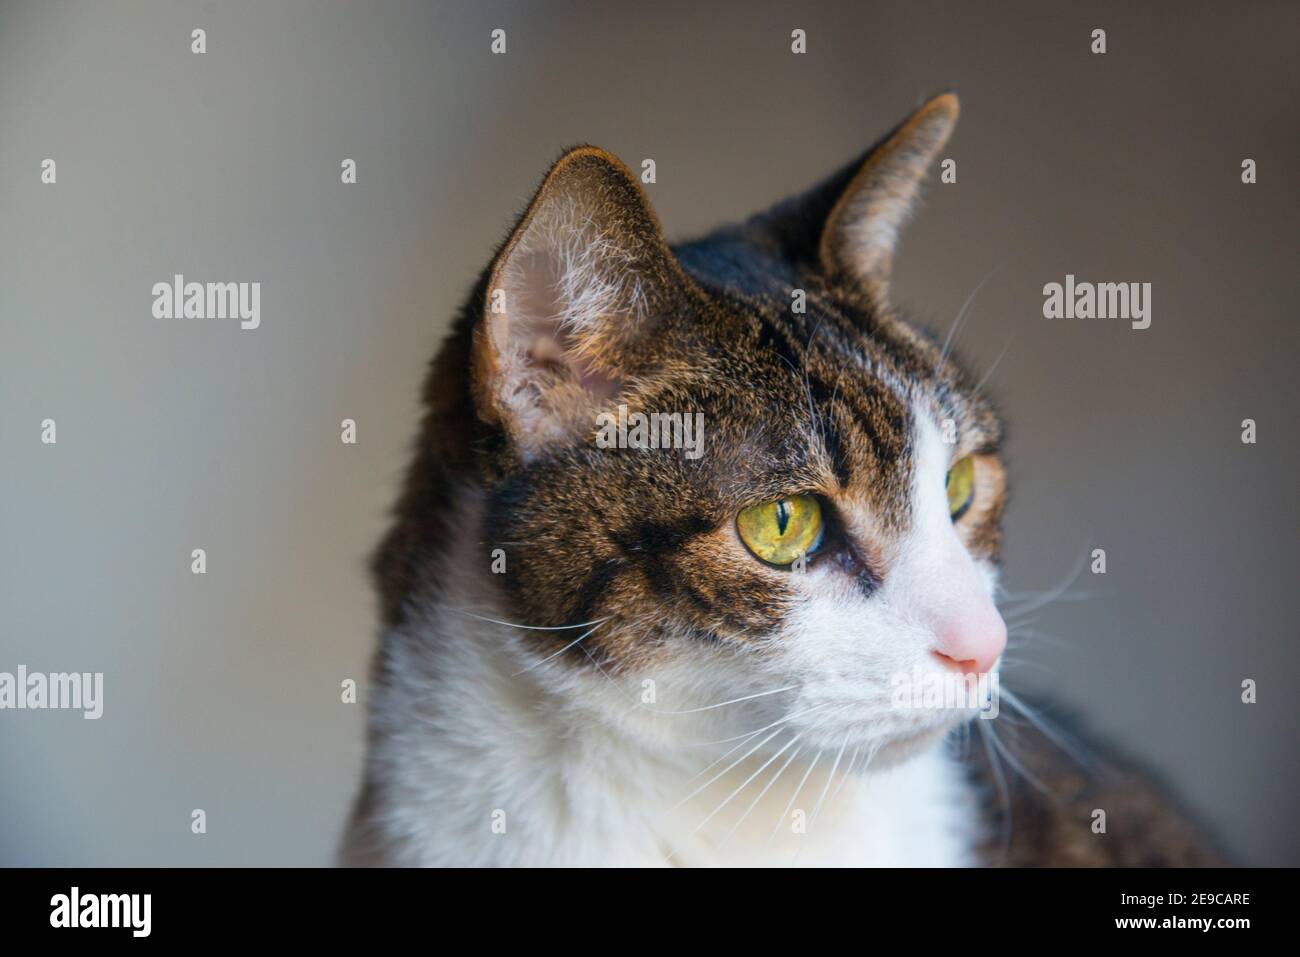 Portrait of tabby and white cat. Close view. Stock Photo